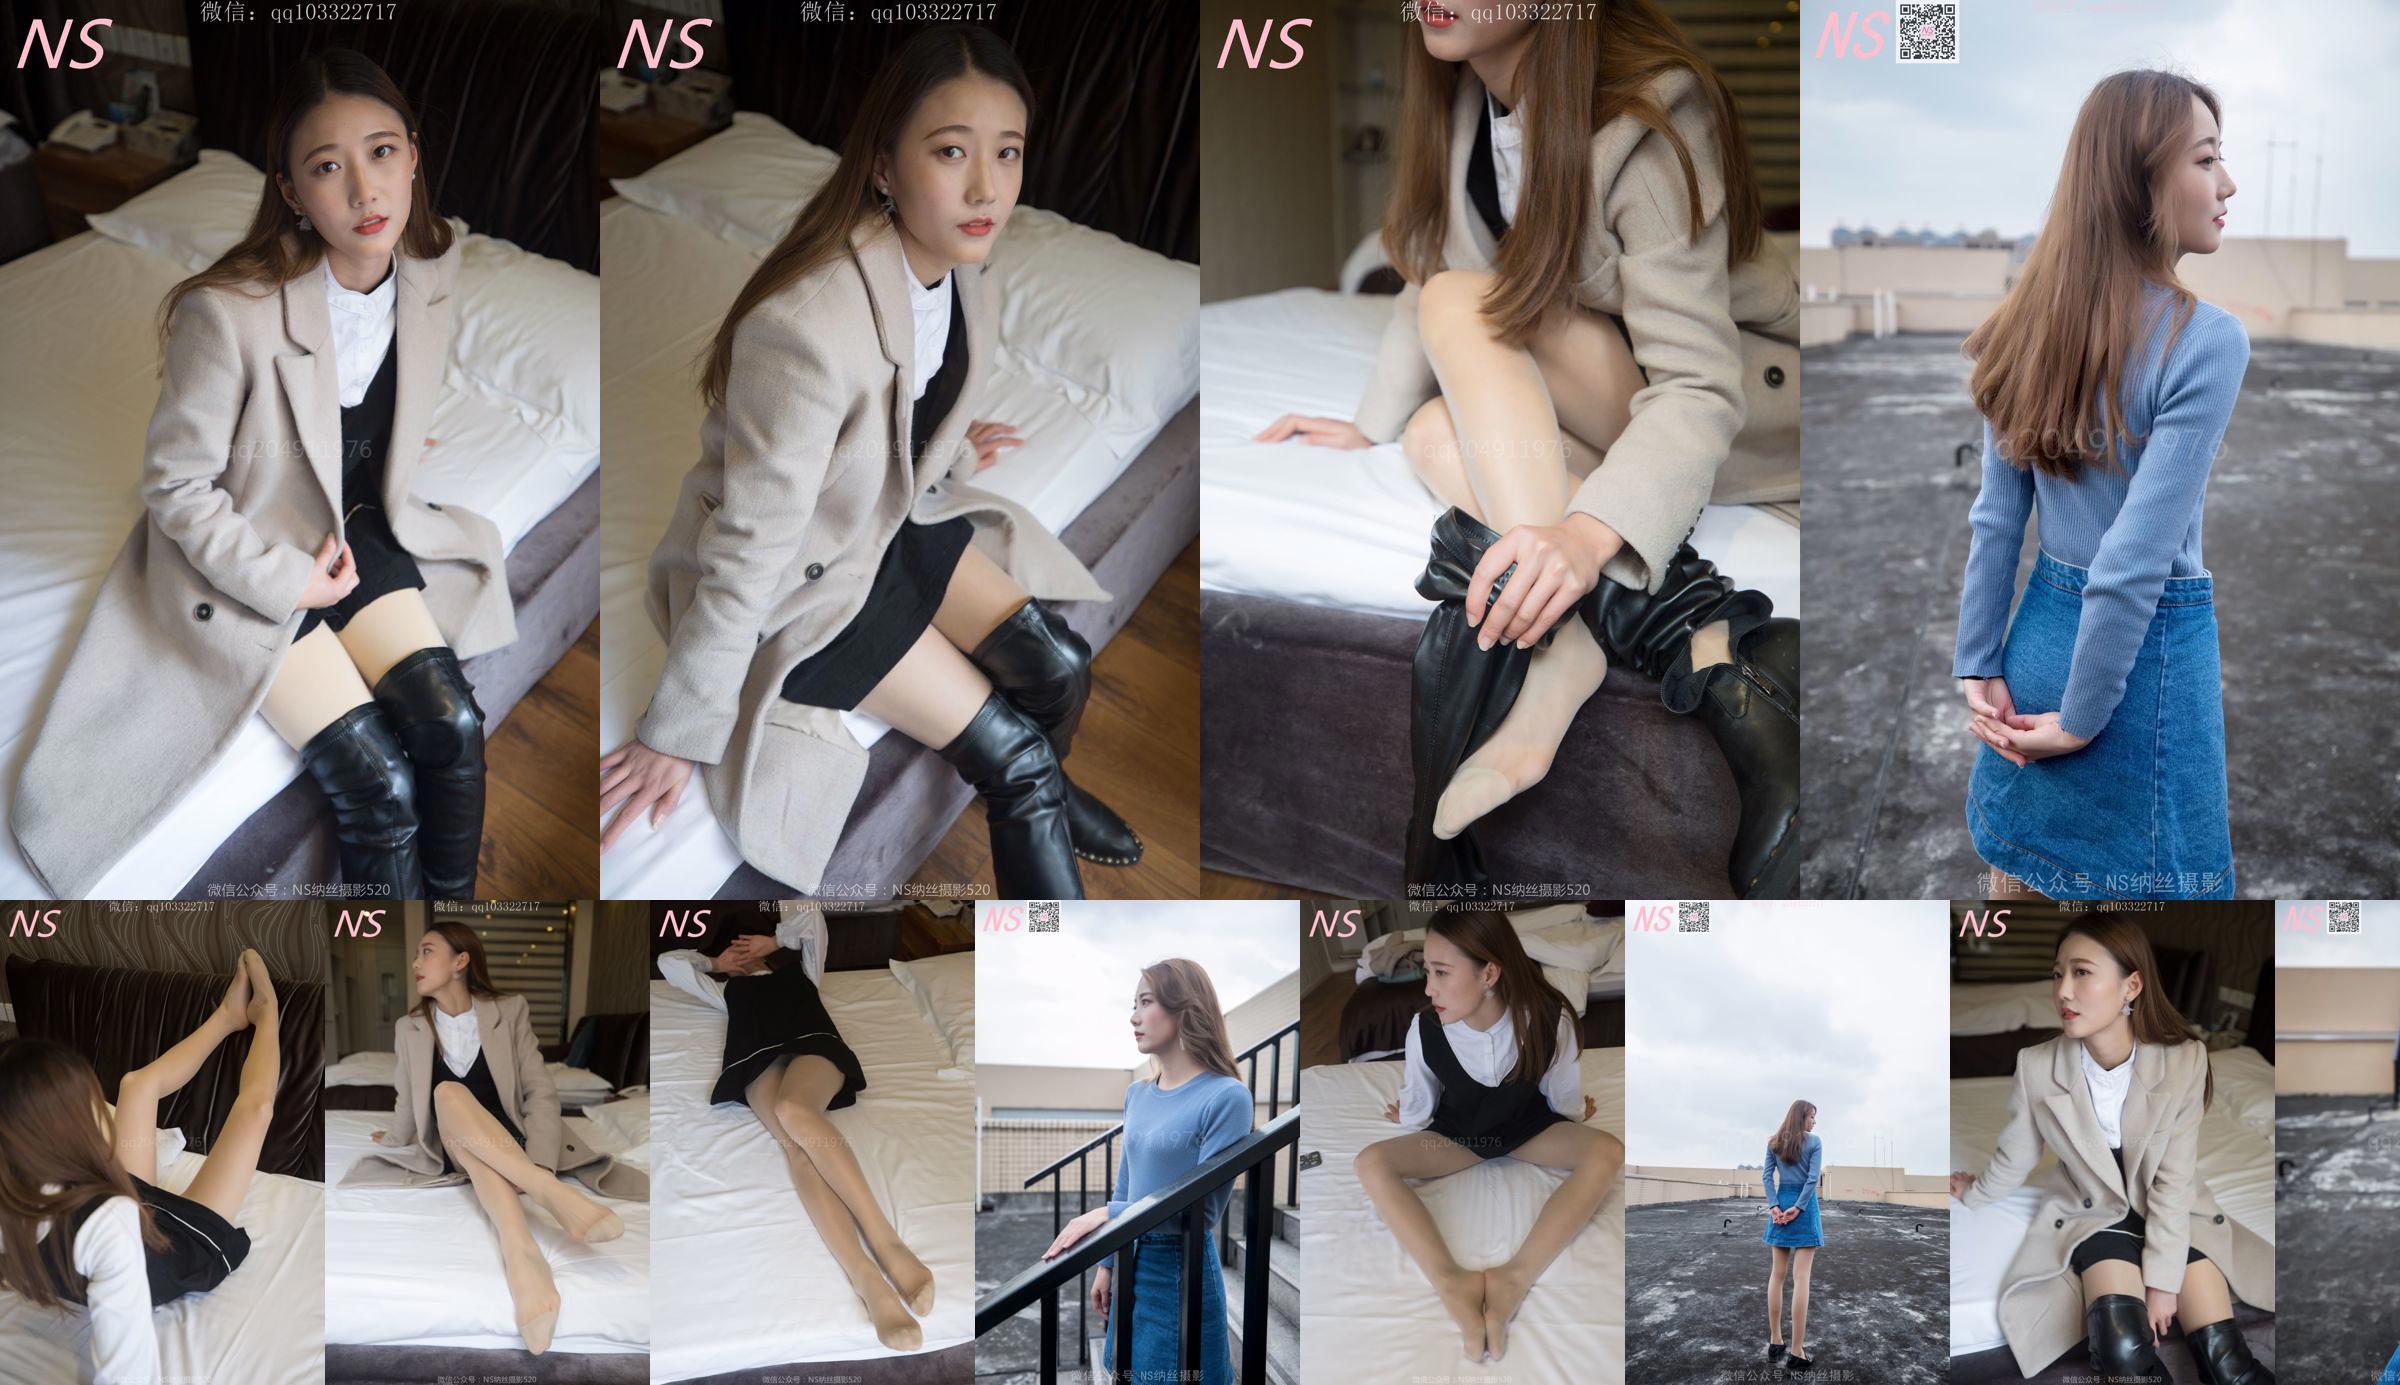 Shu Yi "The Encounter With The Boots Off The Stockings" [Nass Photography] No.17e279 หน้า 3